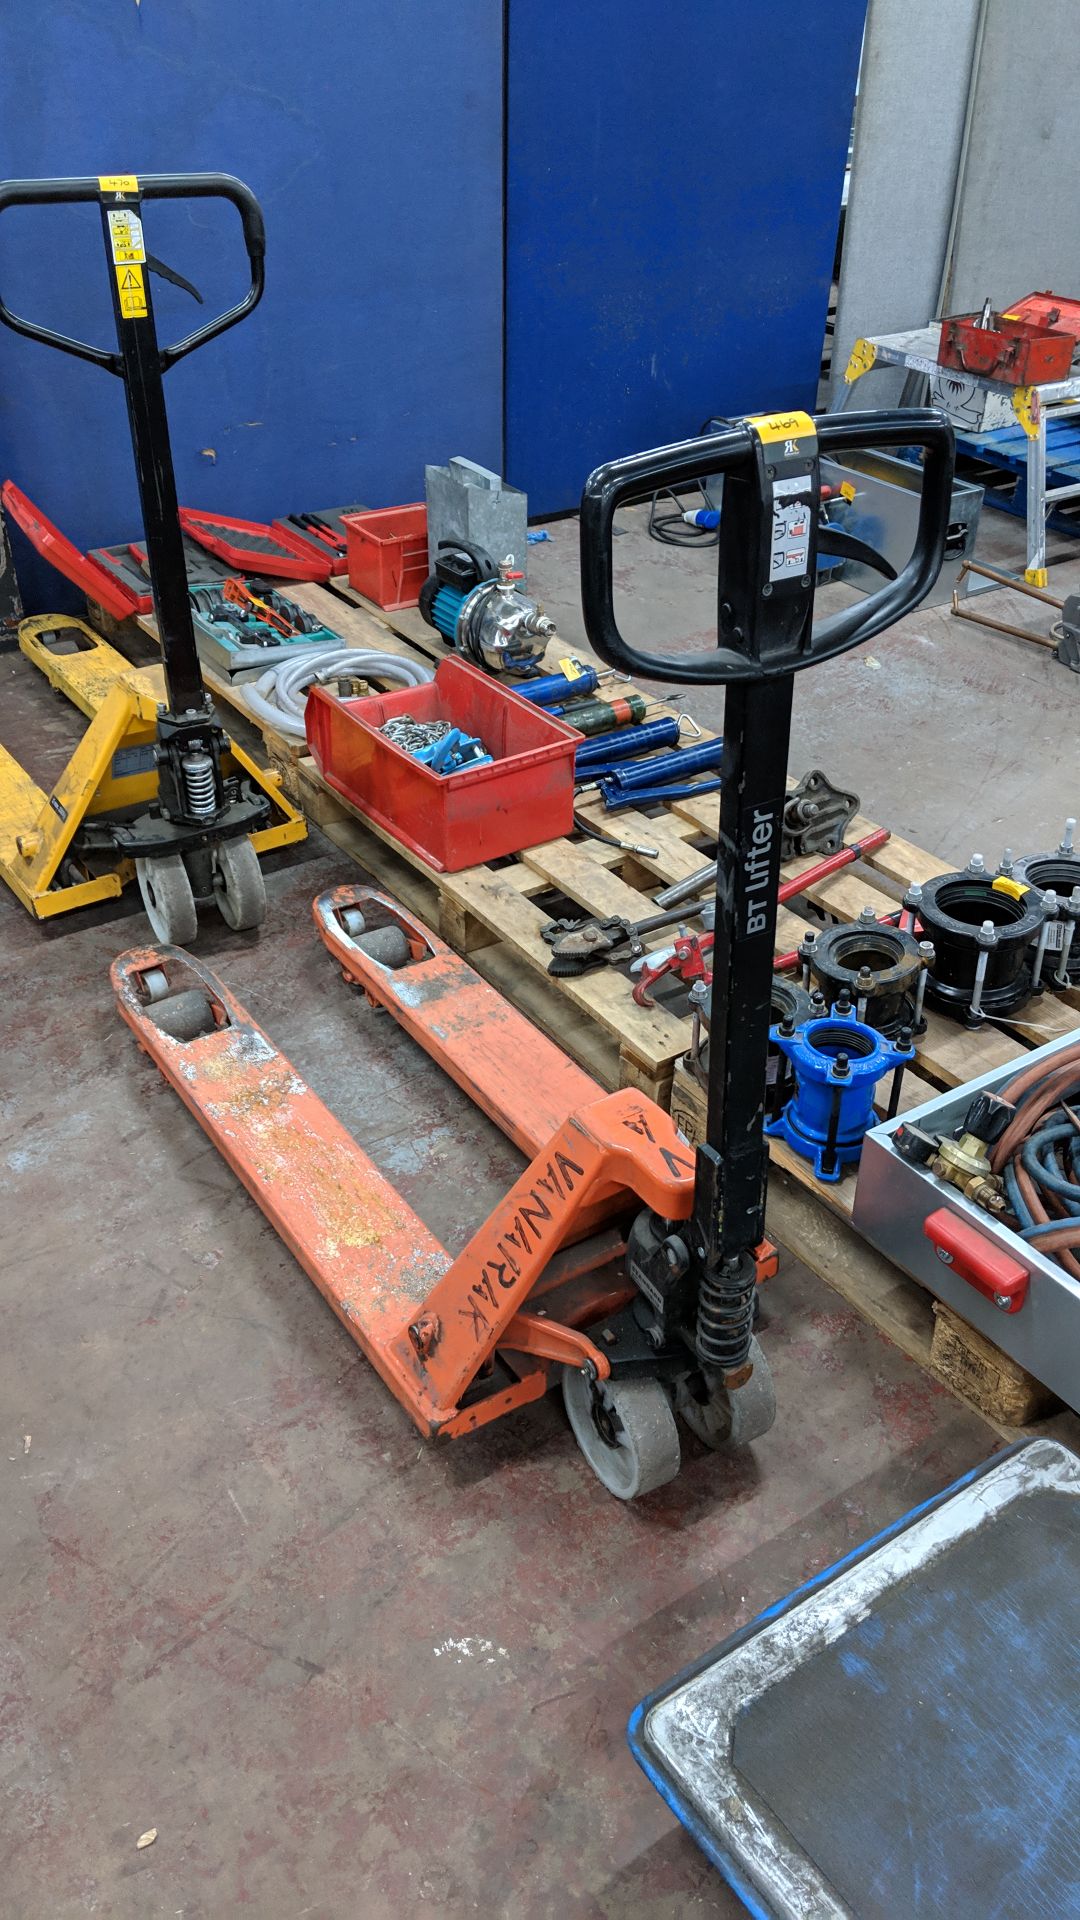 BT Lifter euro pallet truck This lot is one of a number being sold on behalf of the administrator of